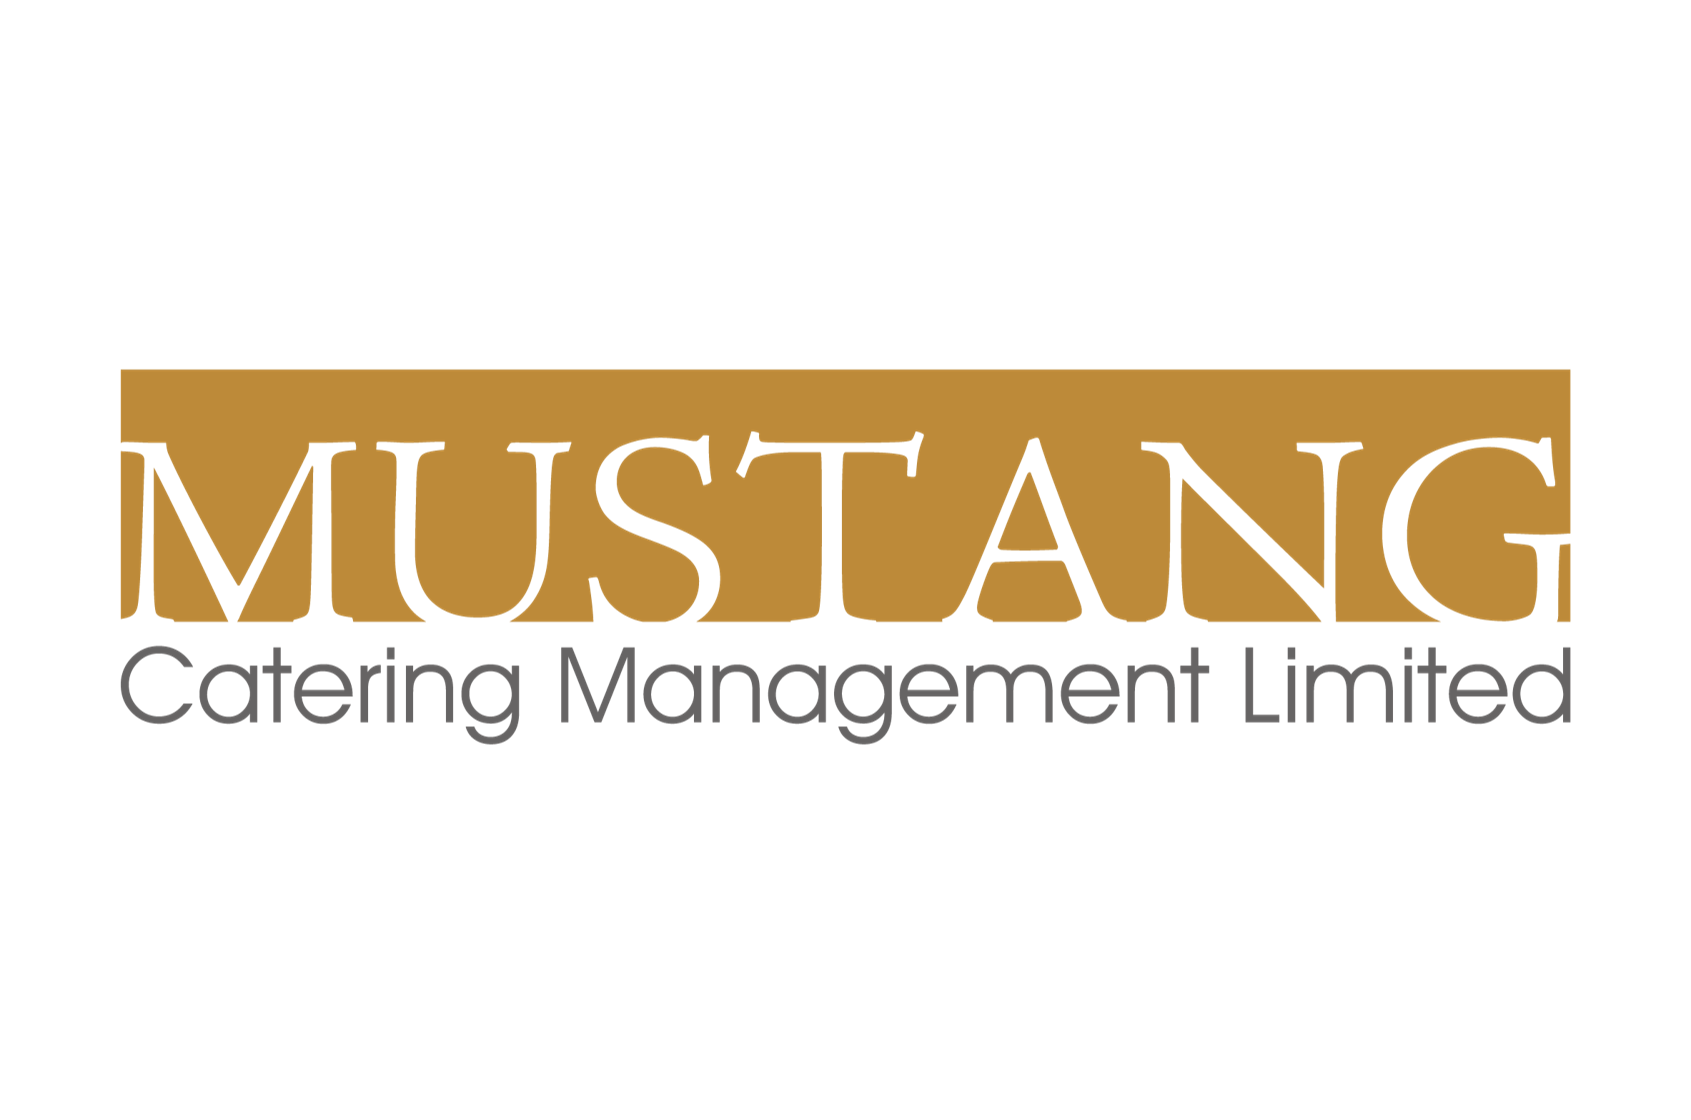 Mustang Catering Management Limited